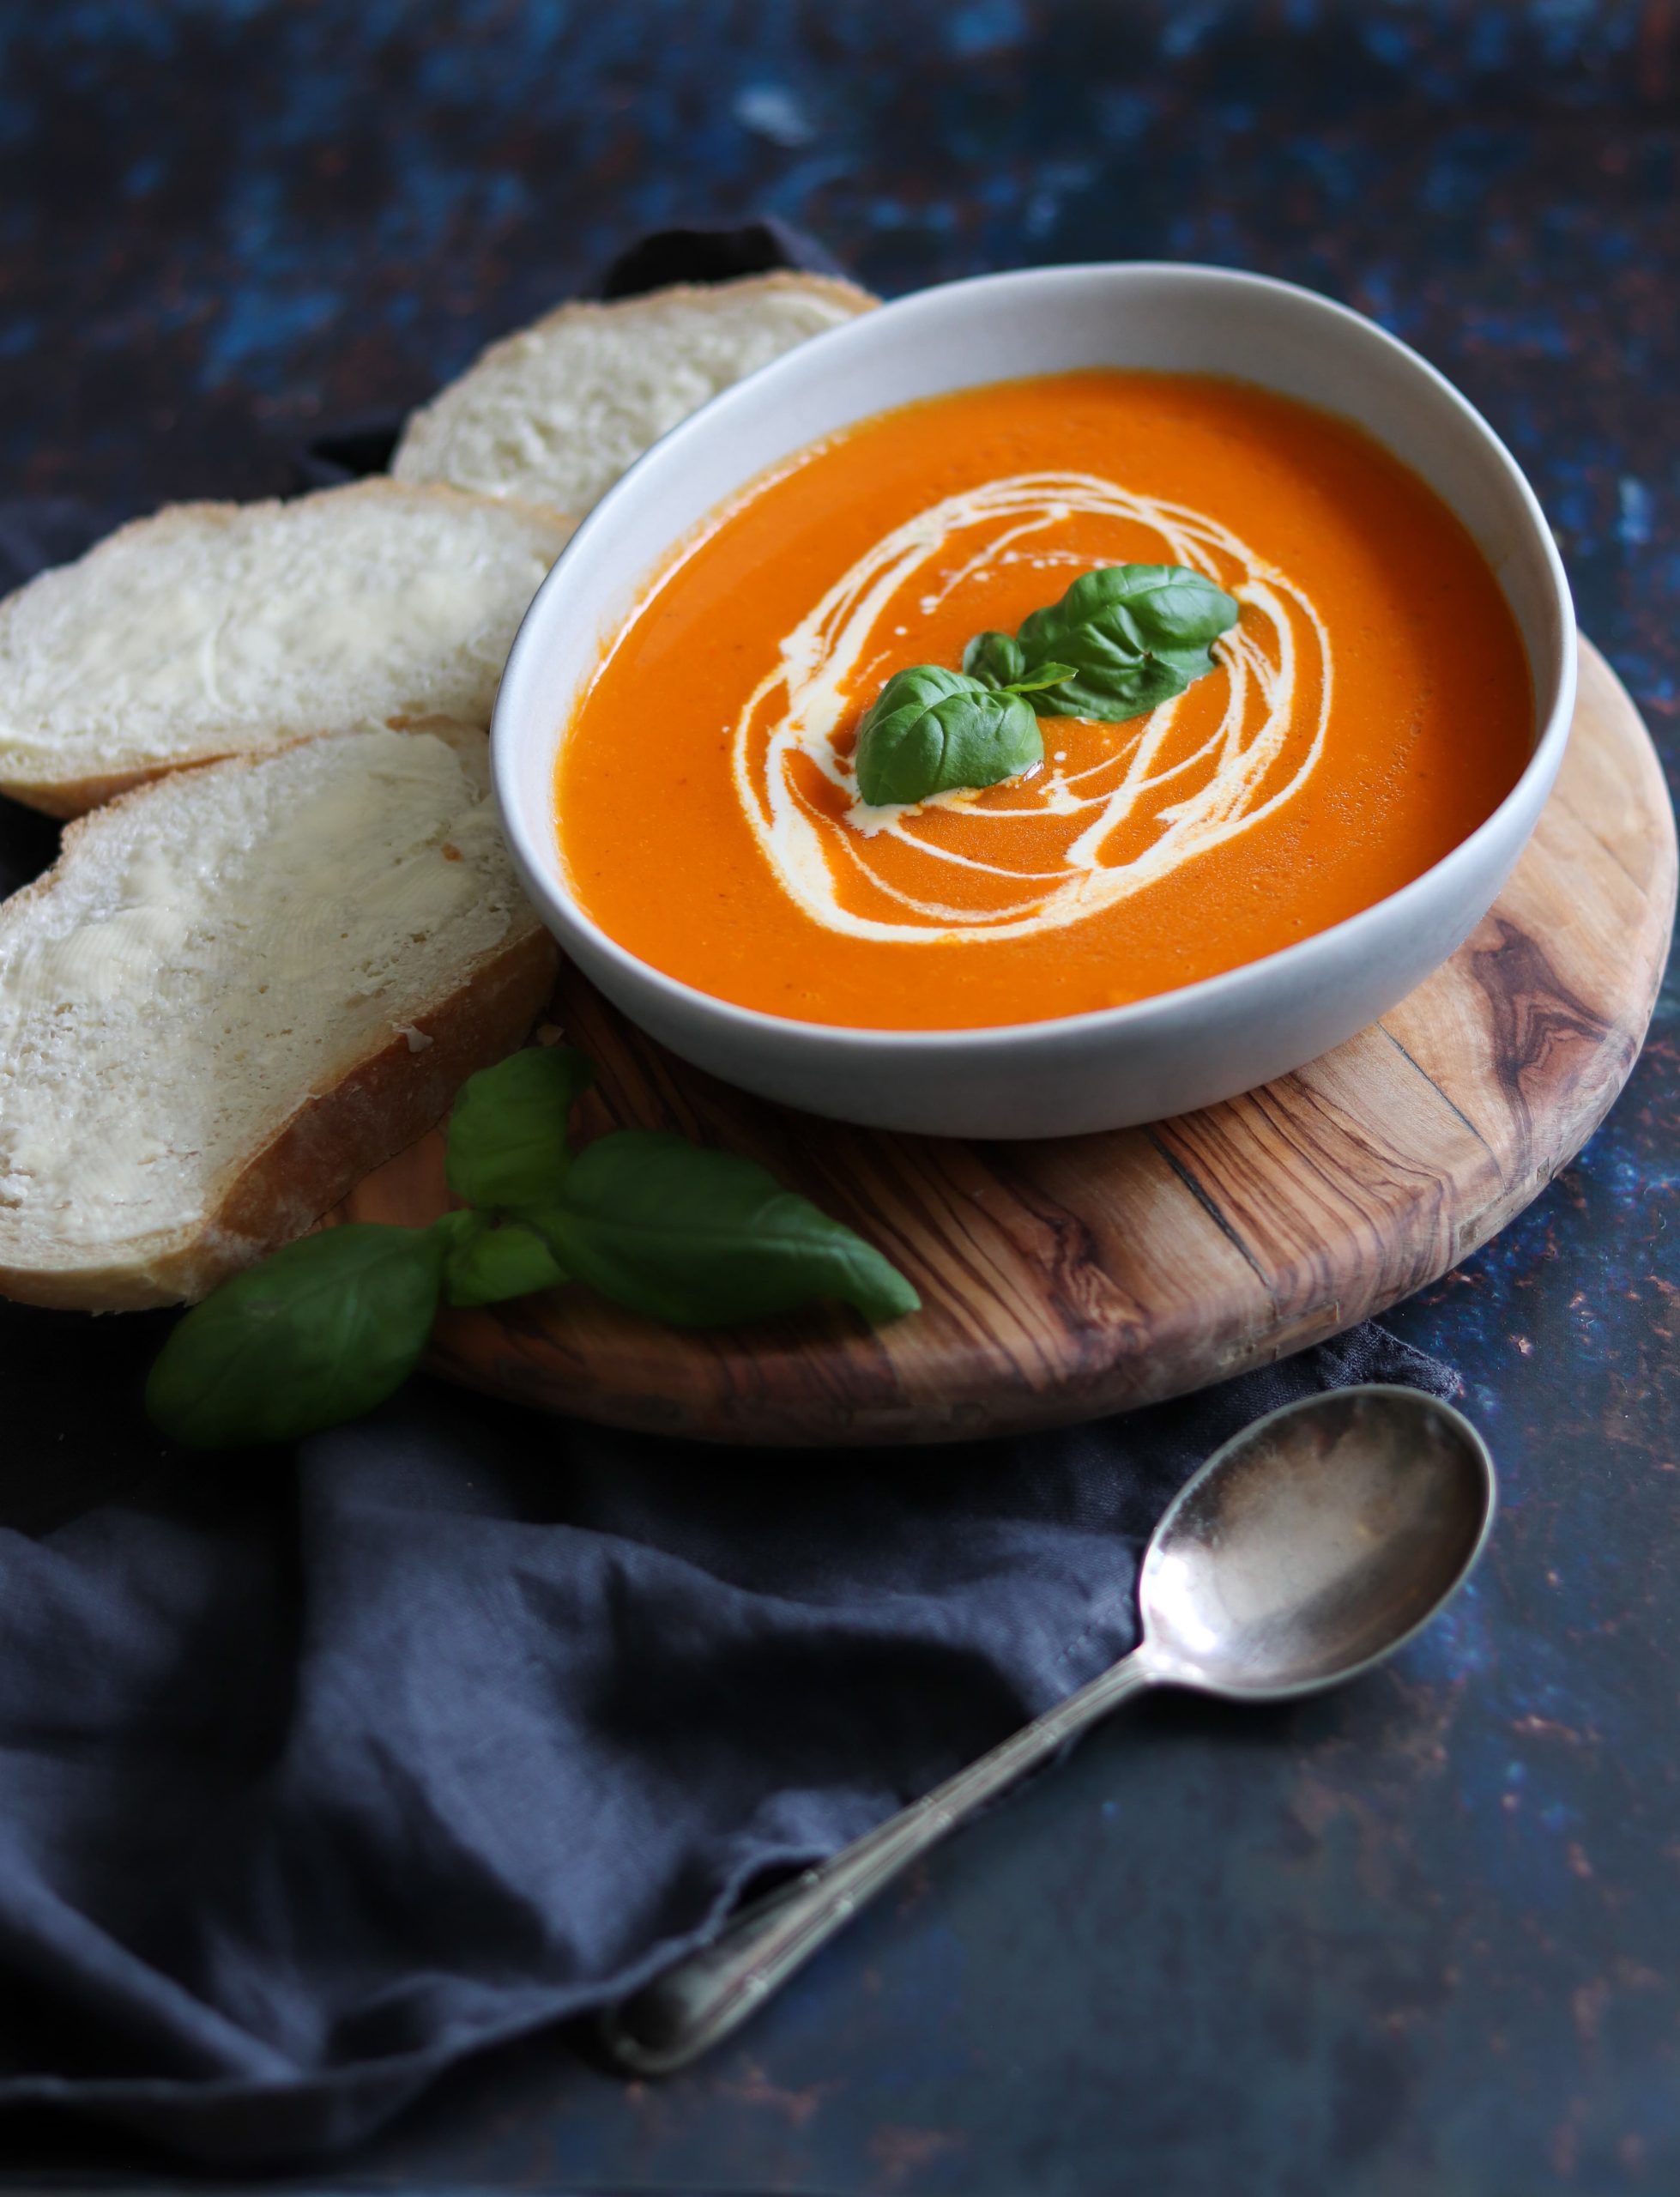 https://www.curlyscooking.co.uk/wp-content/uploads/2020/10/Roasted-Tomato-Red-Pepper-Soup-7-scaled.jpg